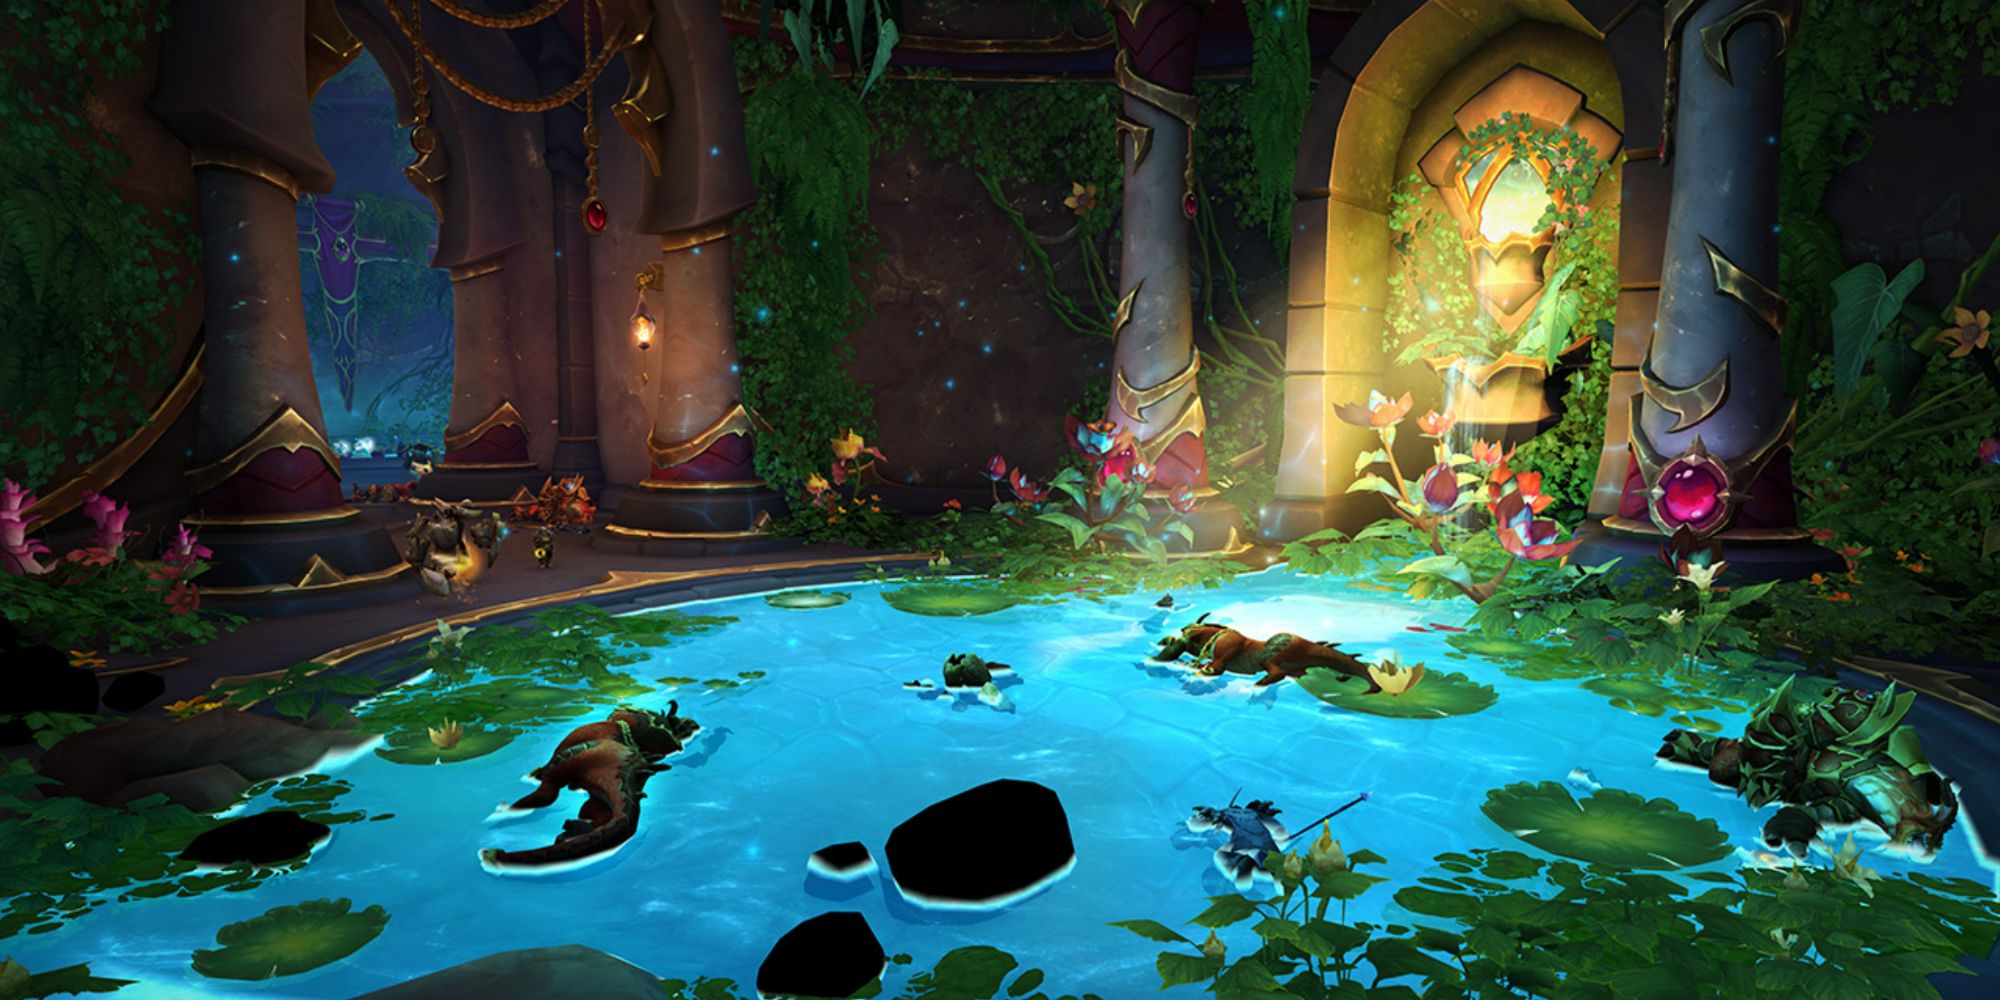 WoW ruby life pools scenary